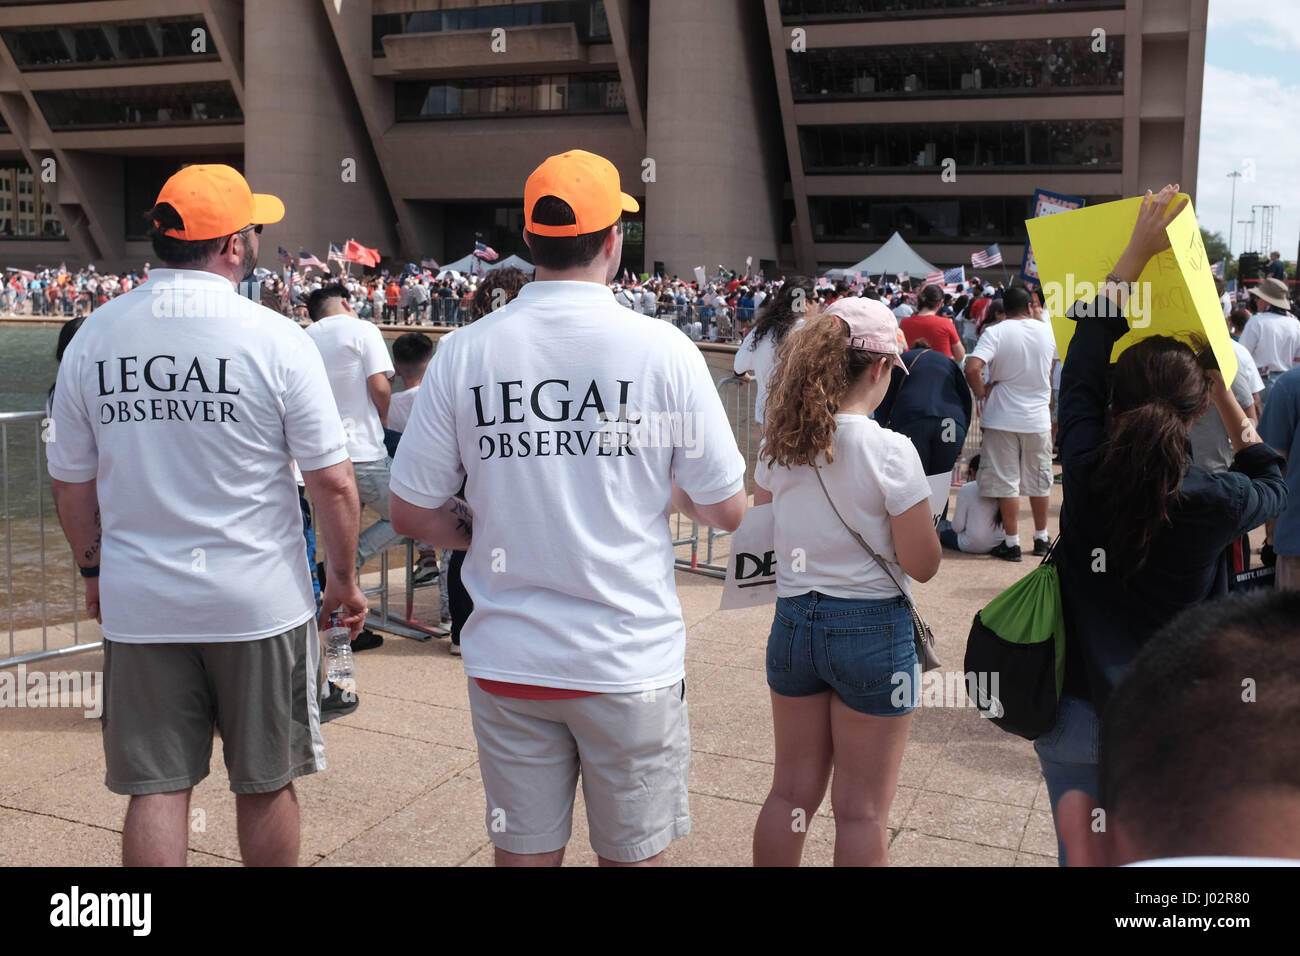 Dallas, Texas. 9th April, 2017. Thousands of  marchers rally at Dallas City Hall in support of imigration reform. Legal observers monitor in case disputes arise.  Keith Adamek/Alamy Live News Stock Photo